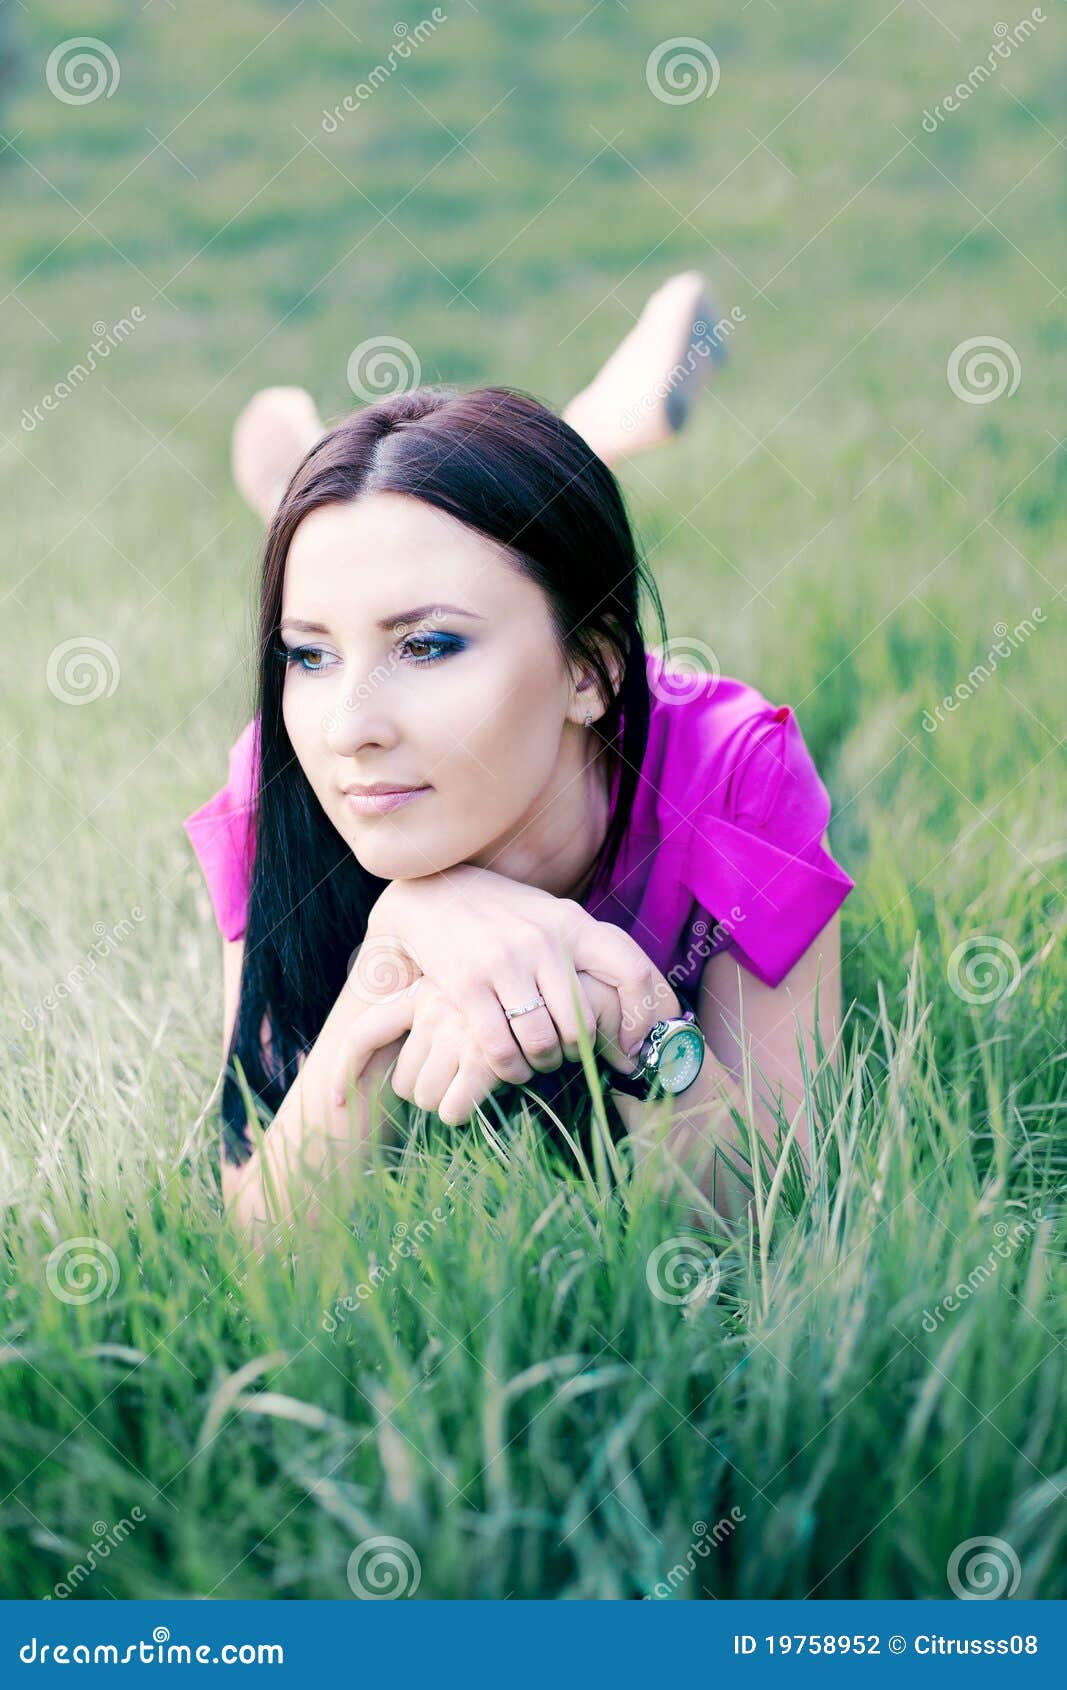 Pretty Young Girl Relaxing On The Lawn Stock Photo - Image of beauty ...